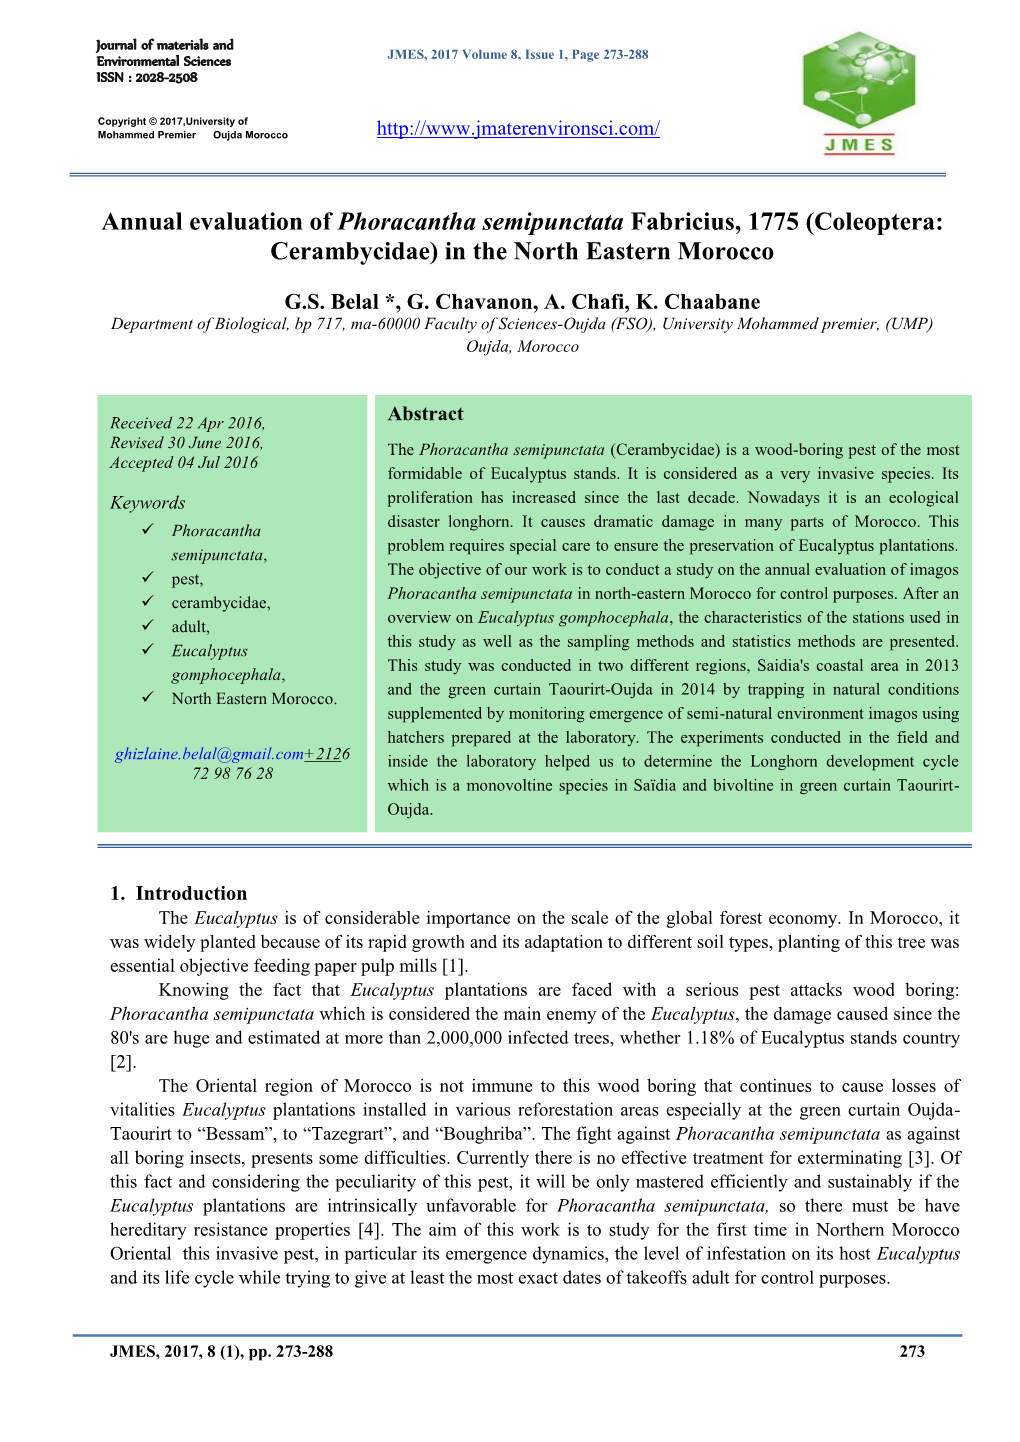 Annual Evaluation of Phoracantha Semipunctata Fabricius, 1775 (Coleoptera: Cerambycidae) in the North Eastern Morocco